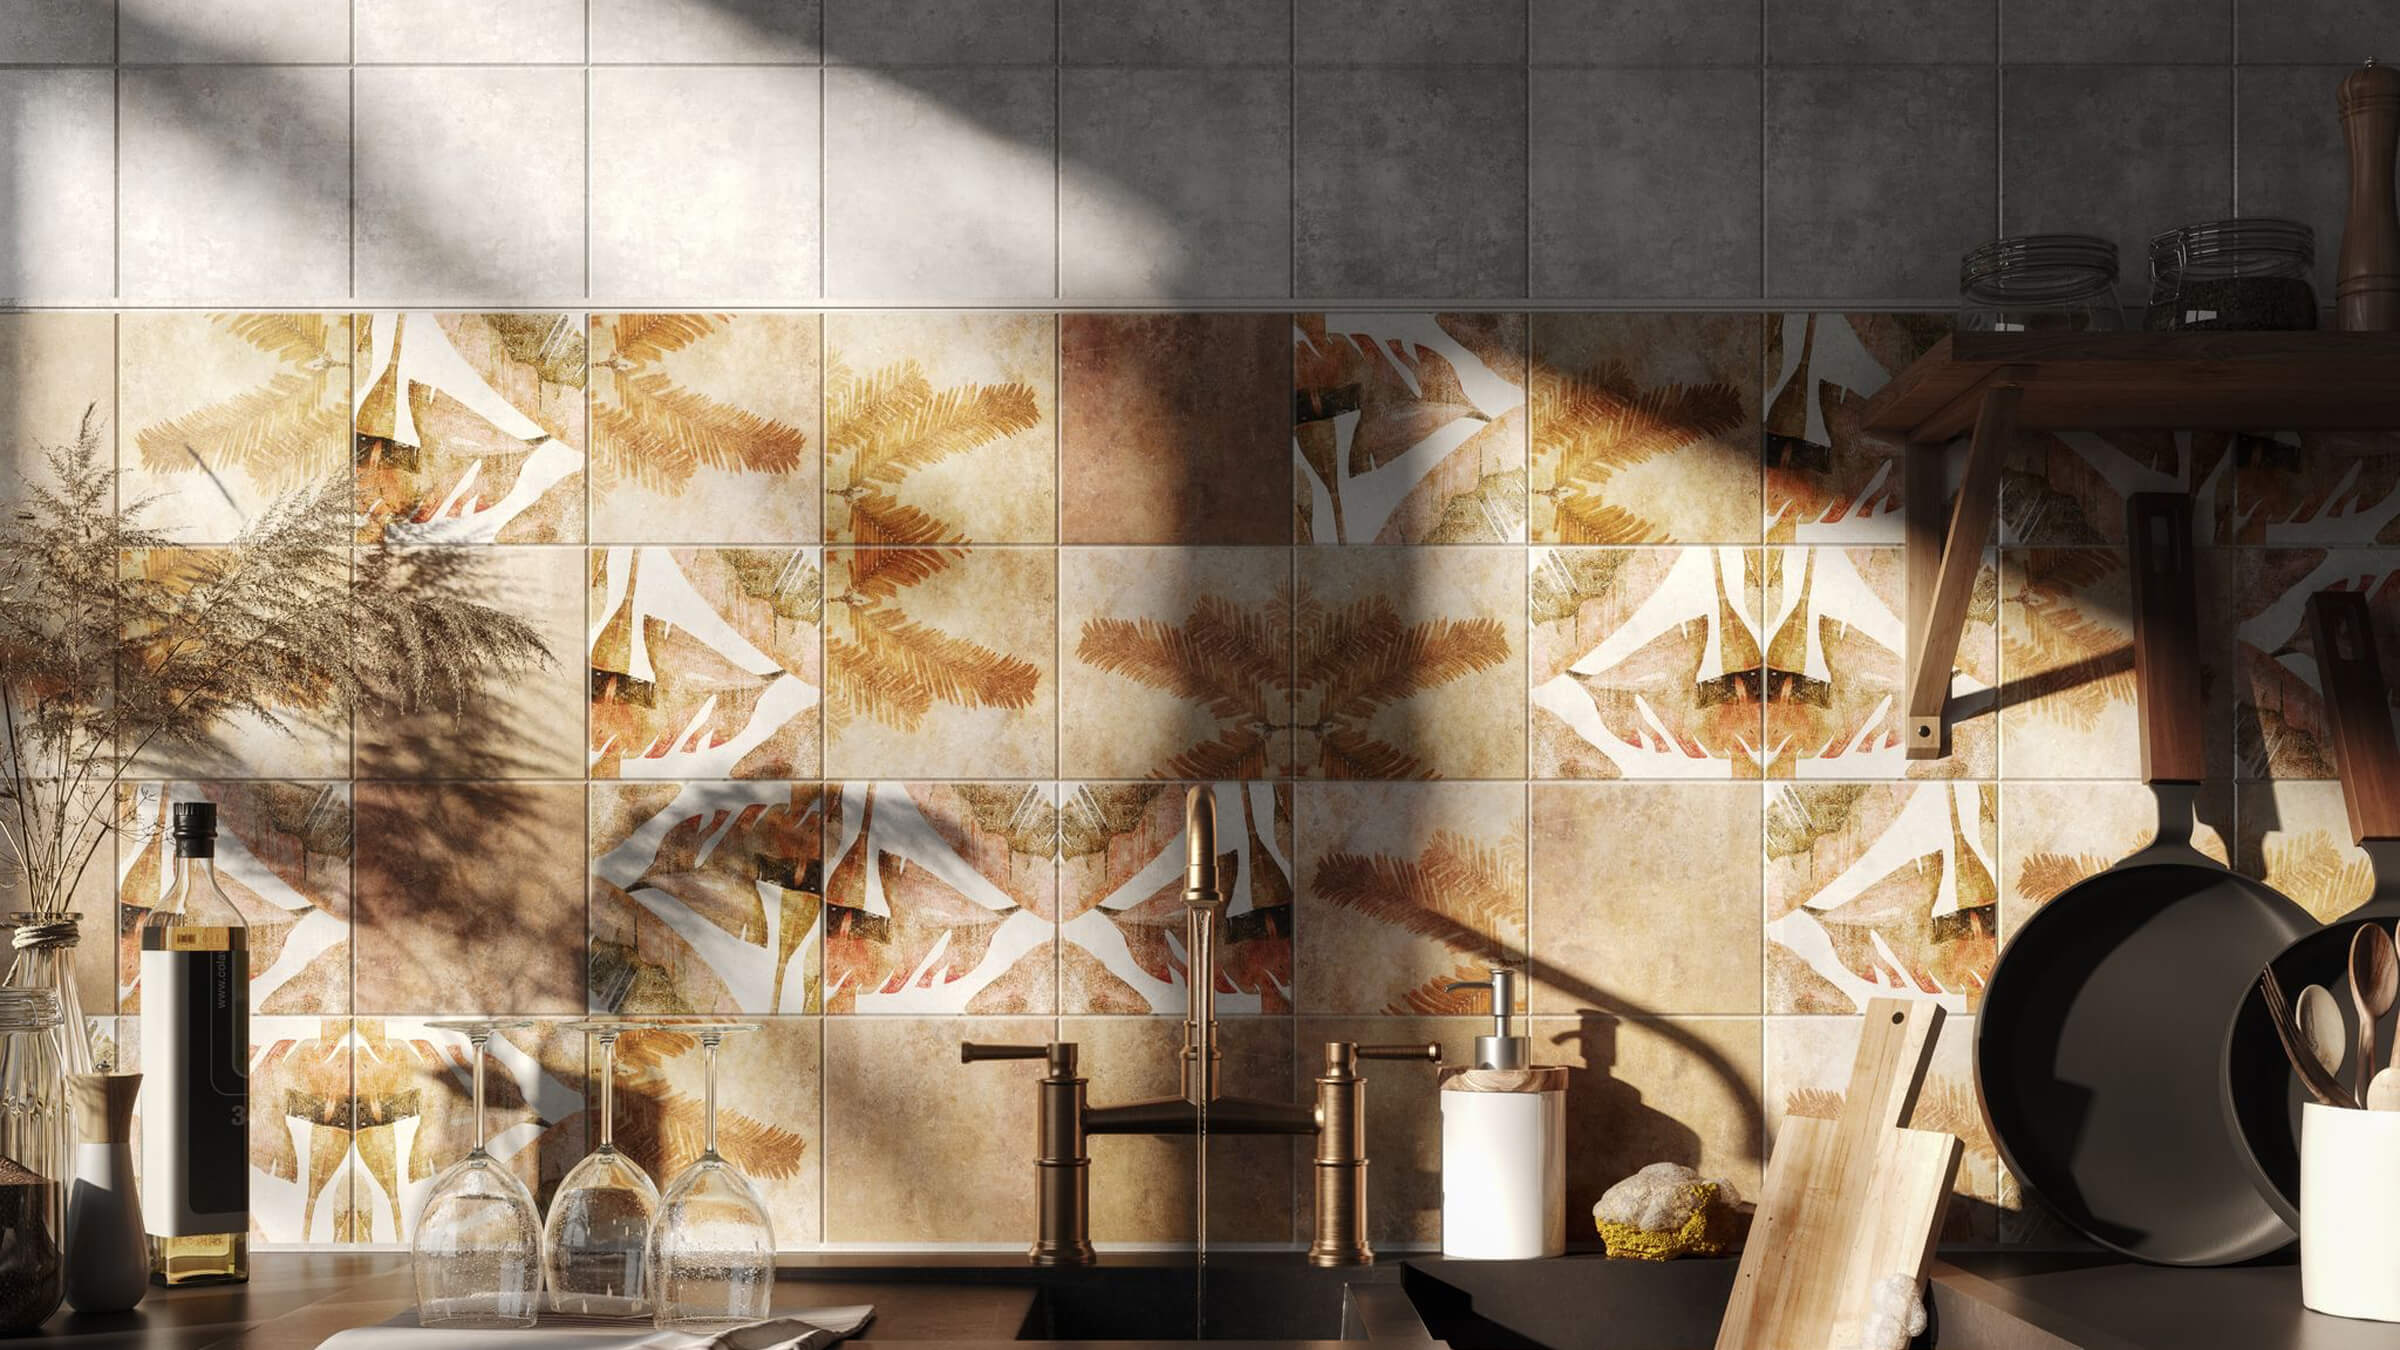 Photorealistic 3D Rendering for Tiles and Mosaics